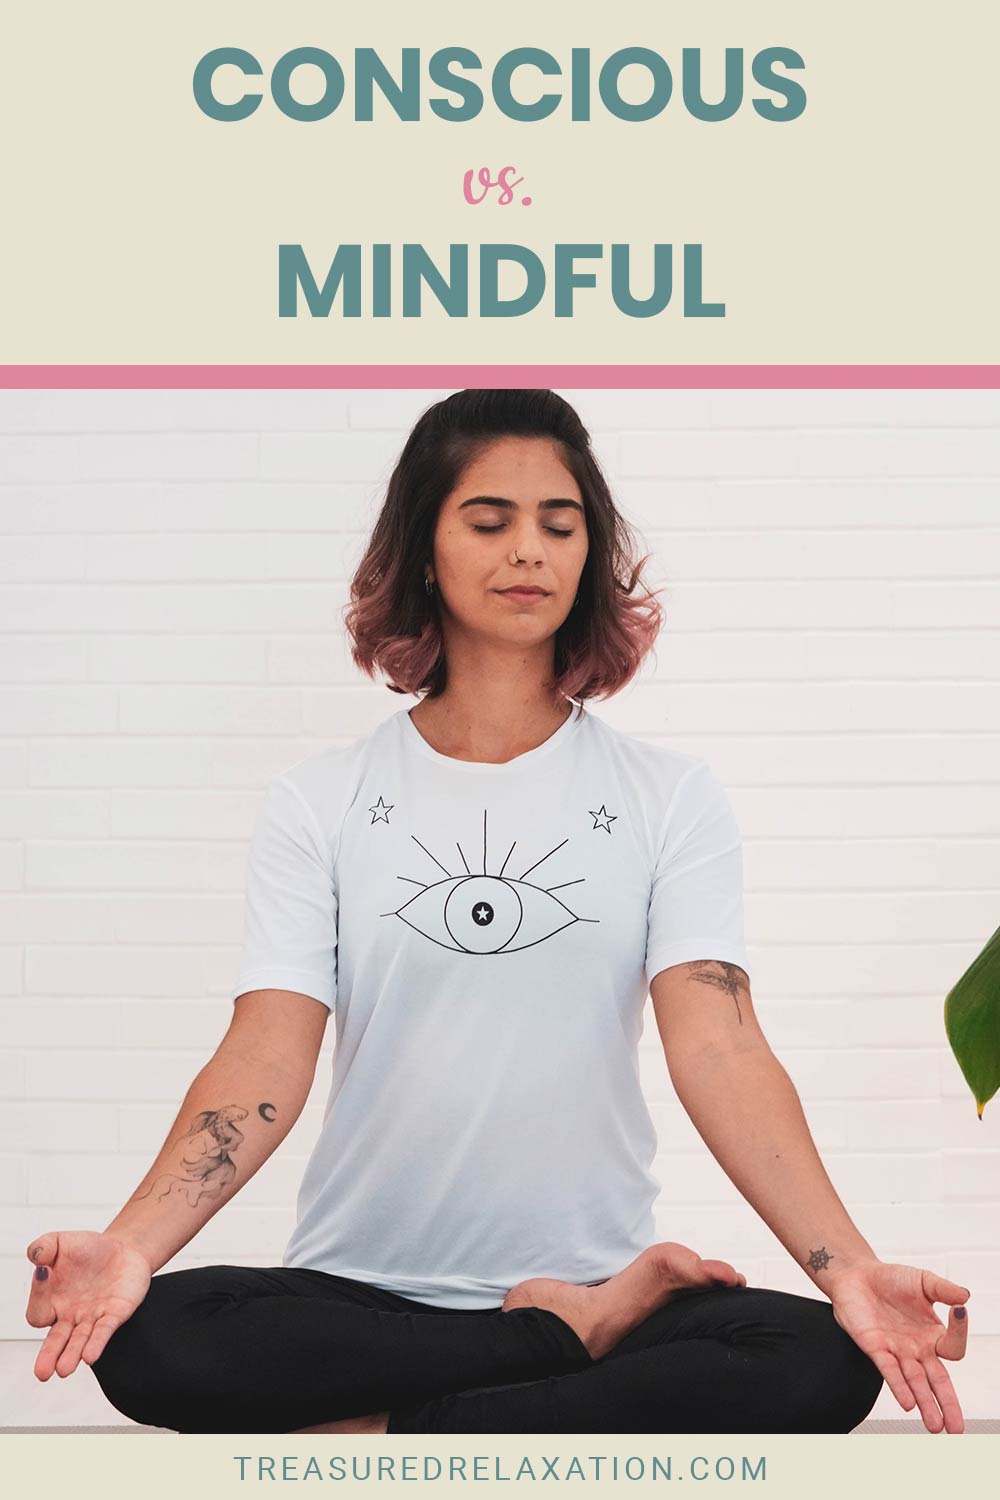 Lady wearing white t shirt and black leggings is doing yoga - Conscious vs. Mindful